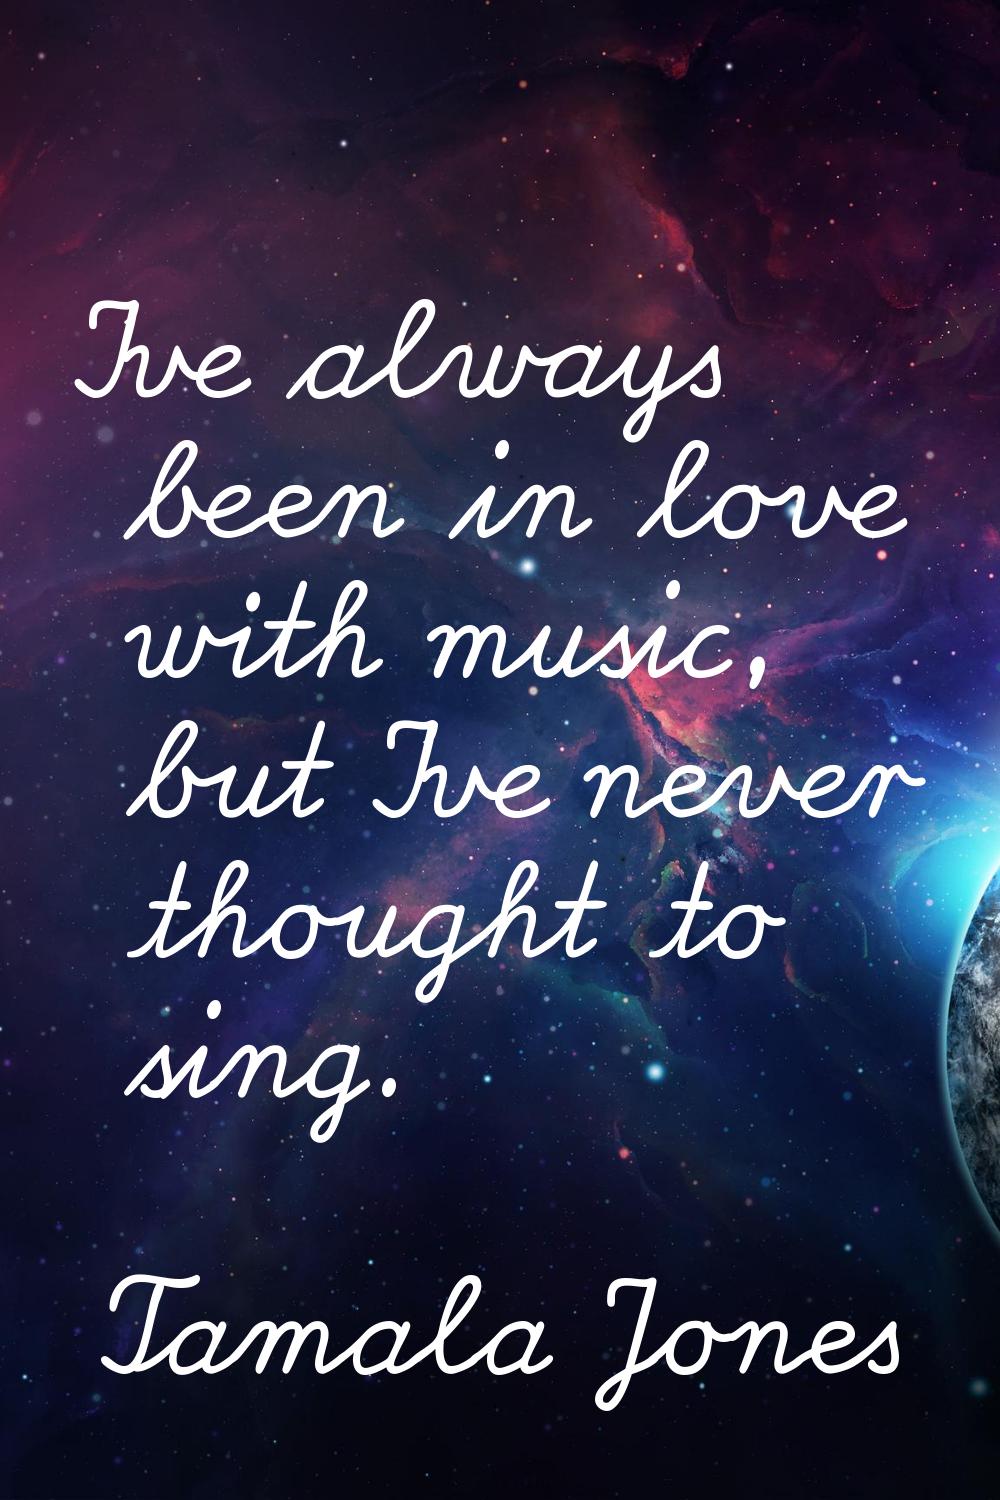 I've always been in love with music, but I've never thought to sing.